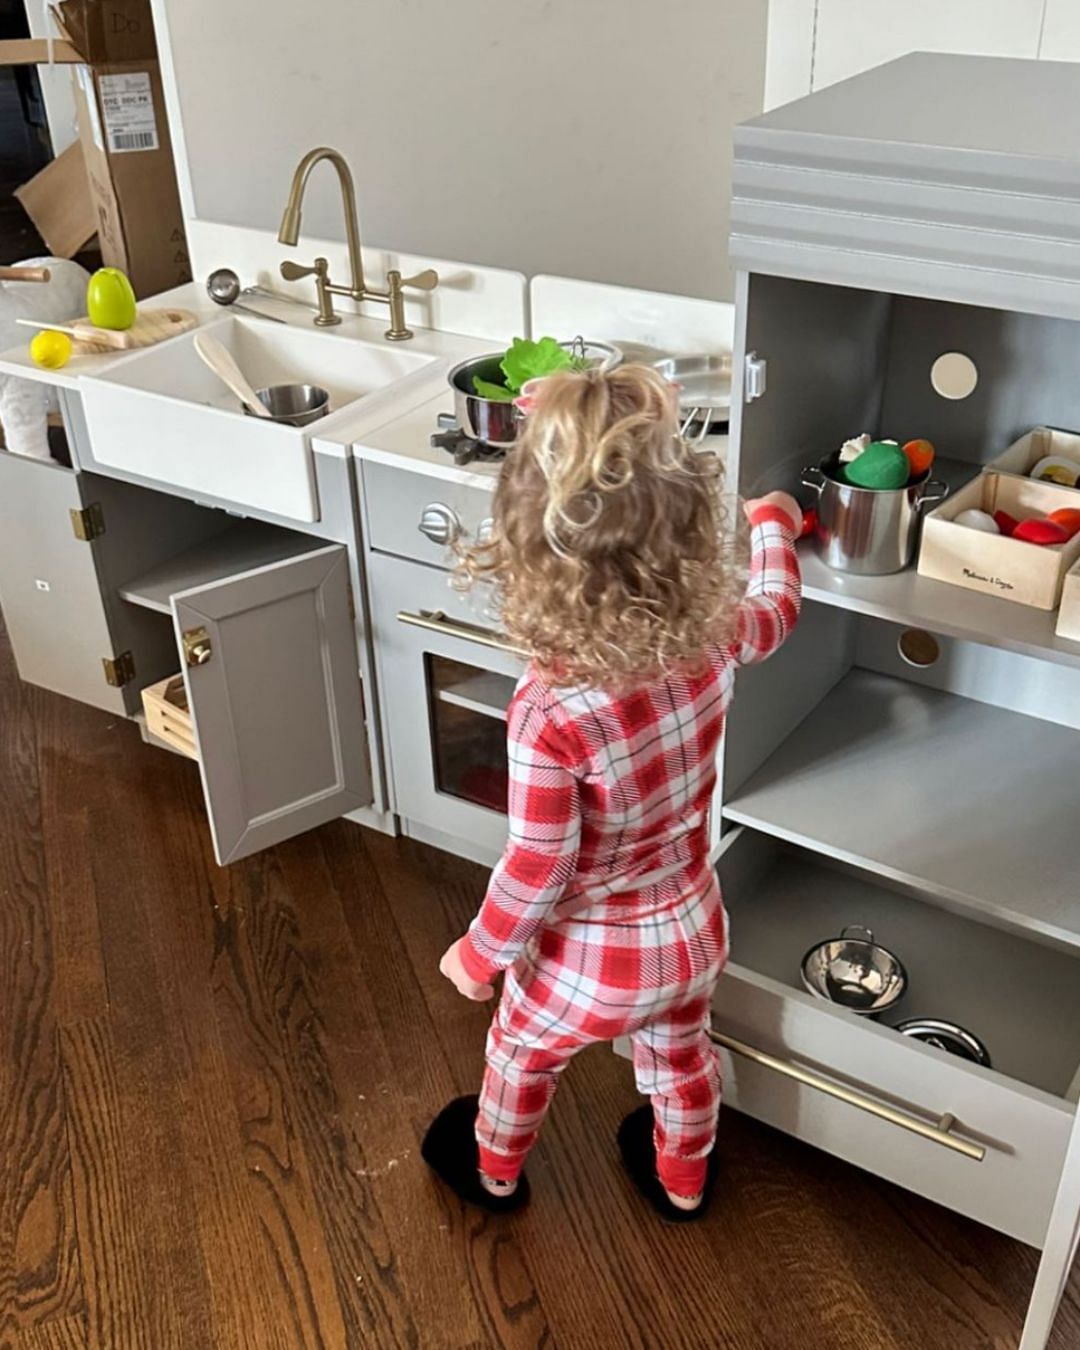 Sterling having fun in her new kitchen. Source: Brittany Mahomes' IG